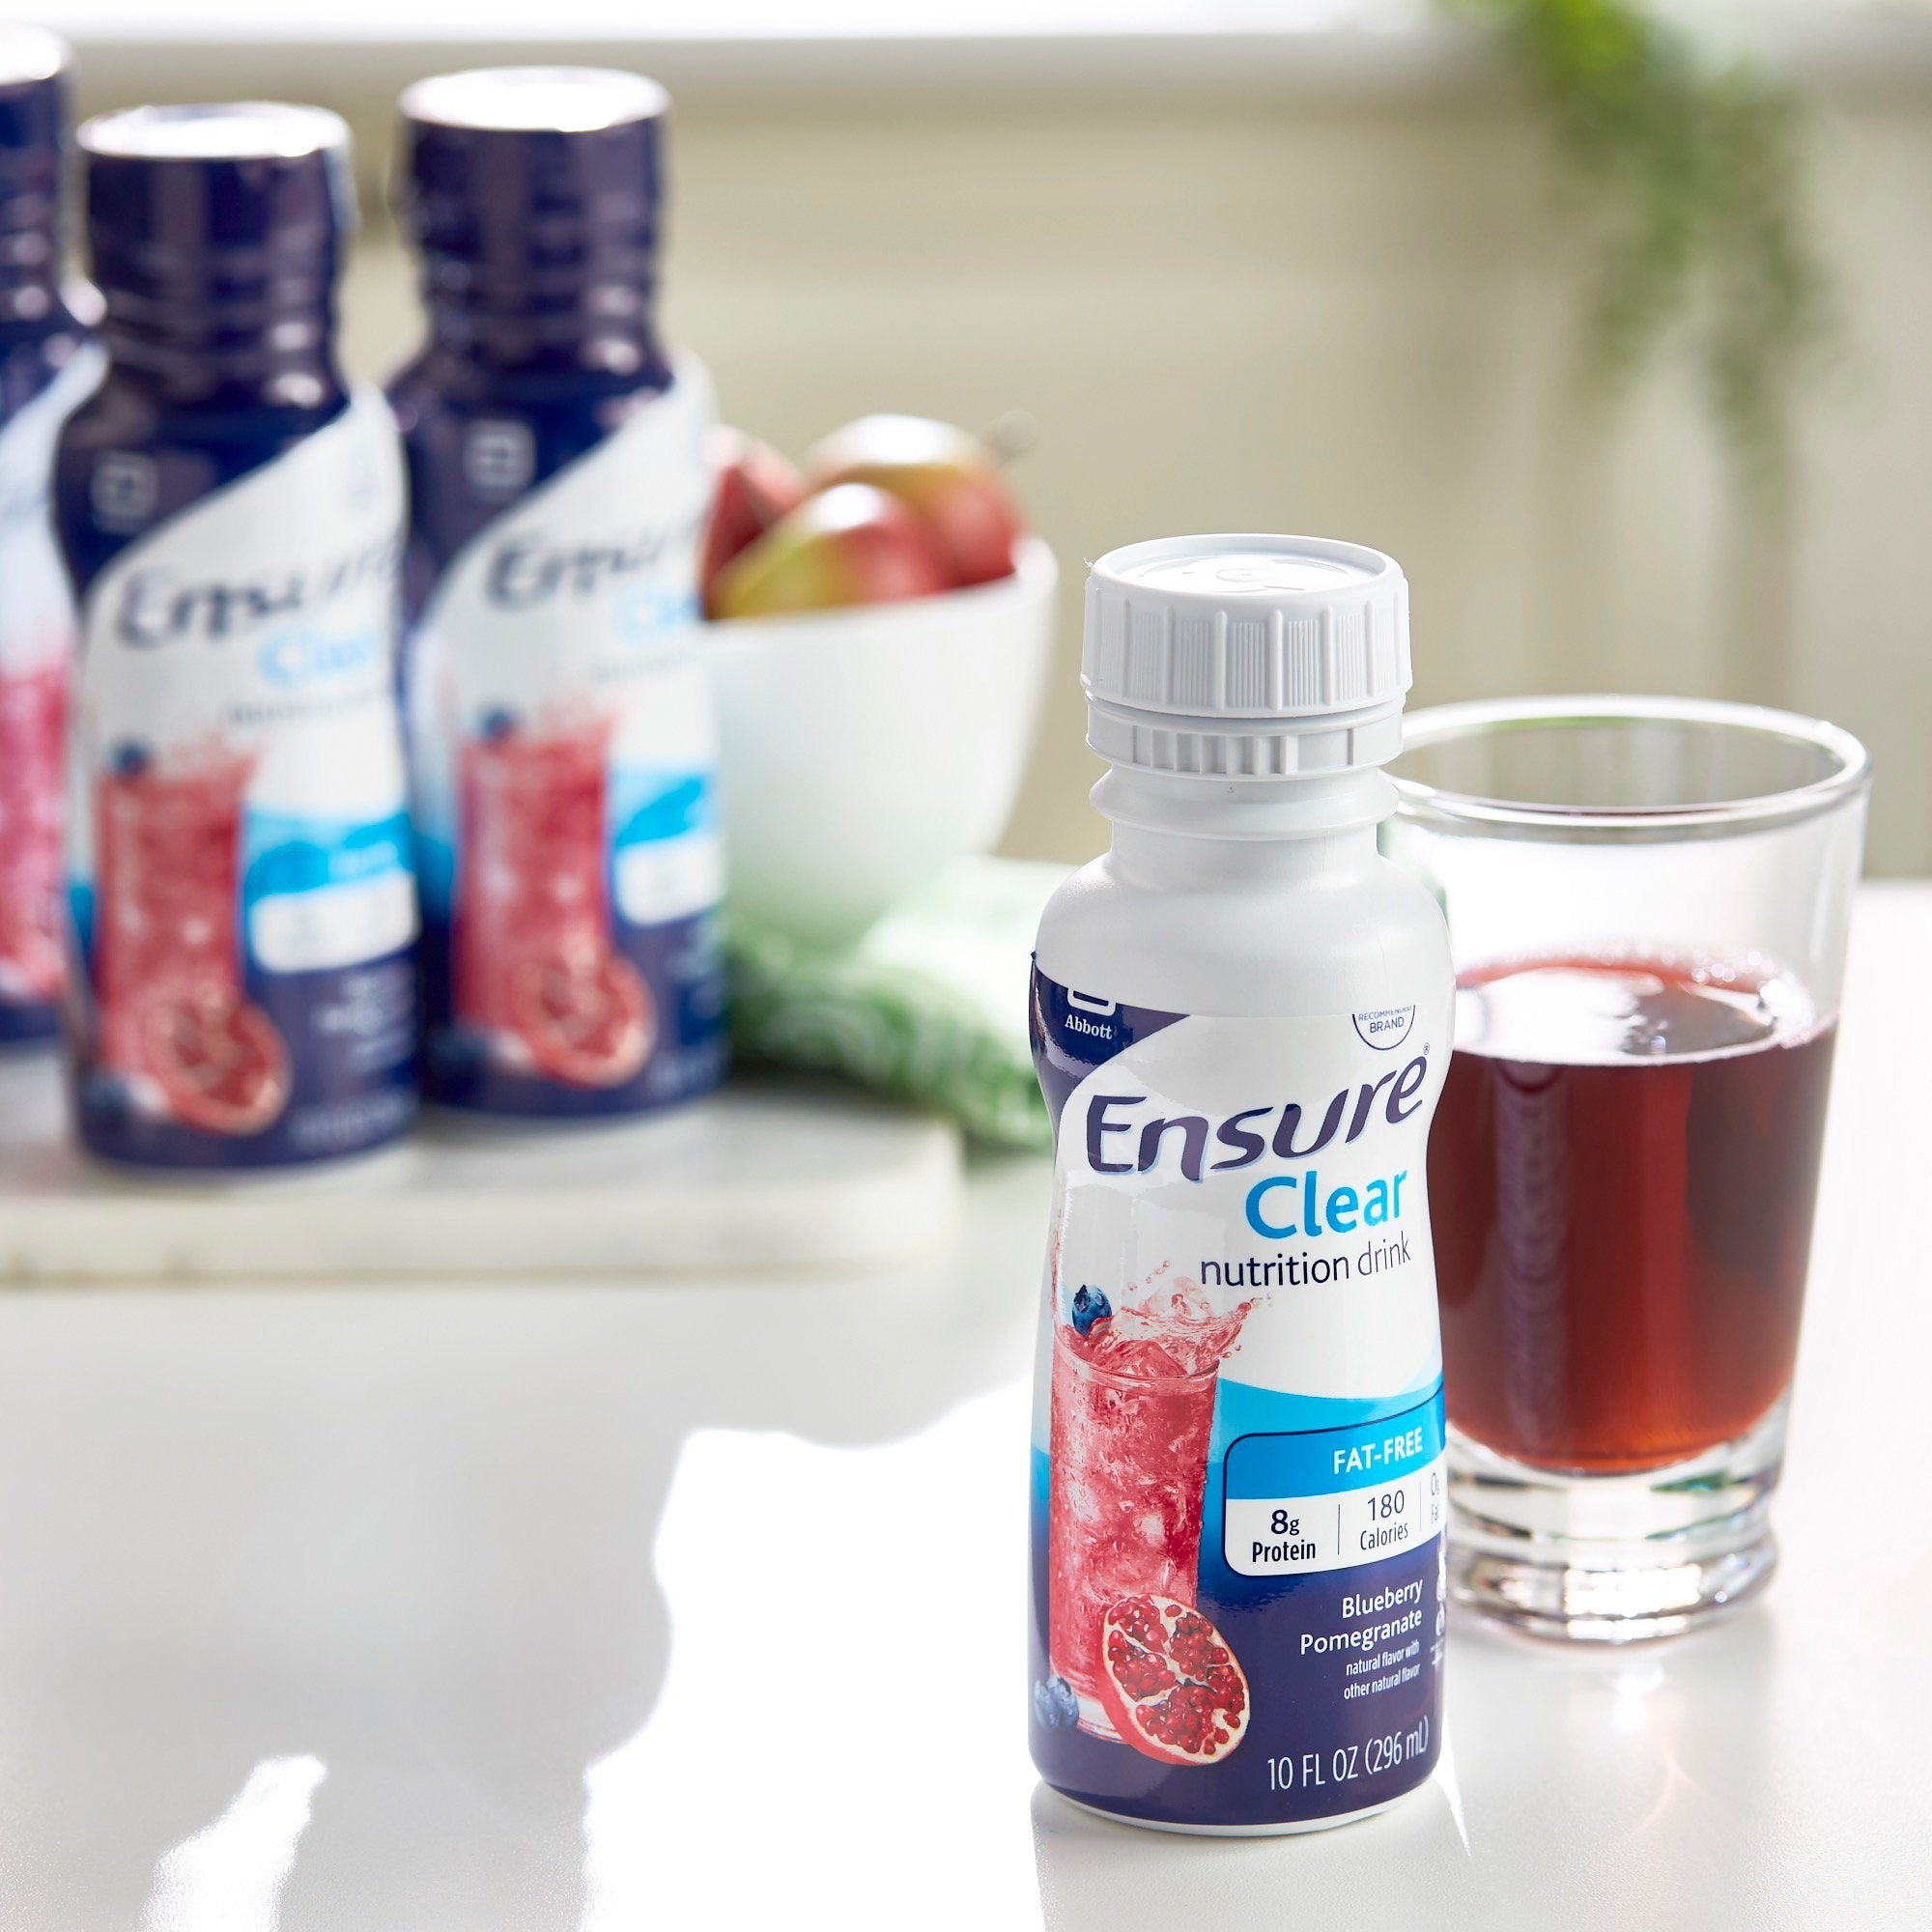 Ensure Clear Nutrition Drink, 0g fat, 8g of high-quality protein